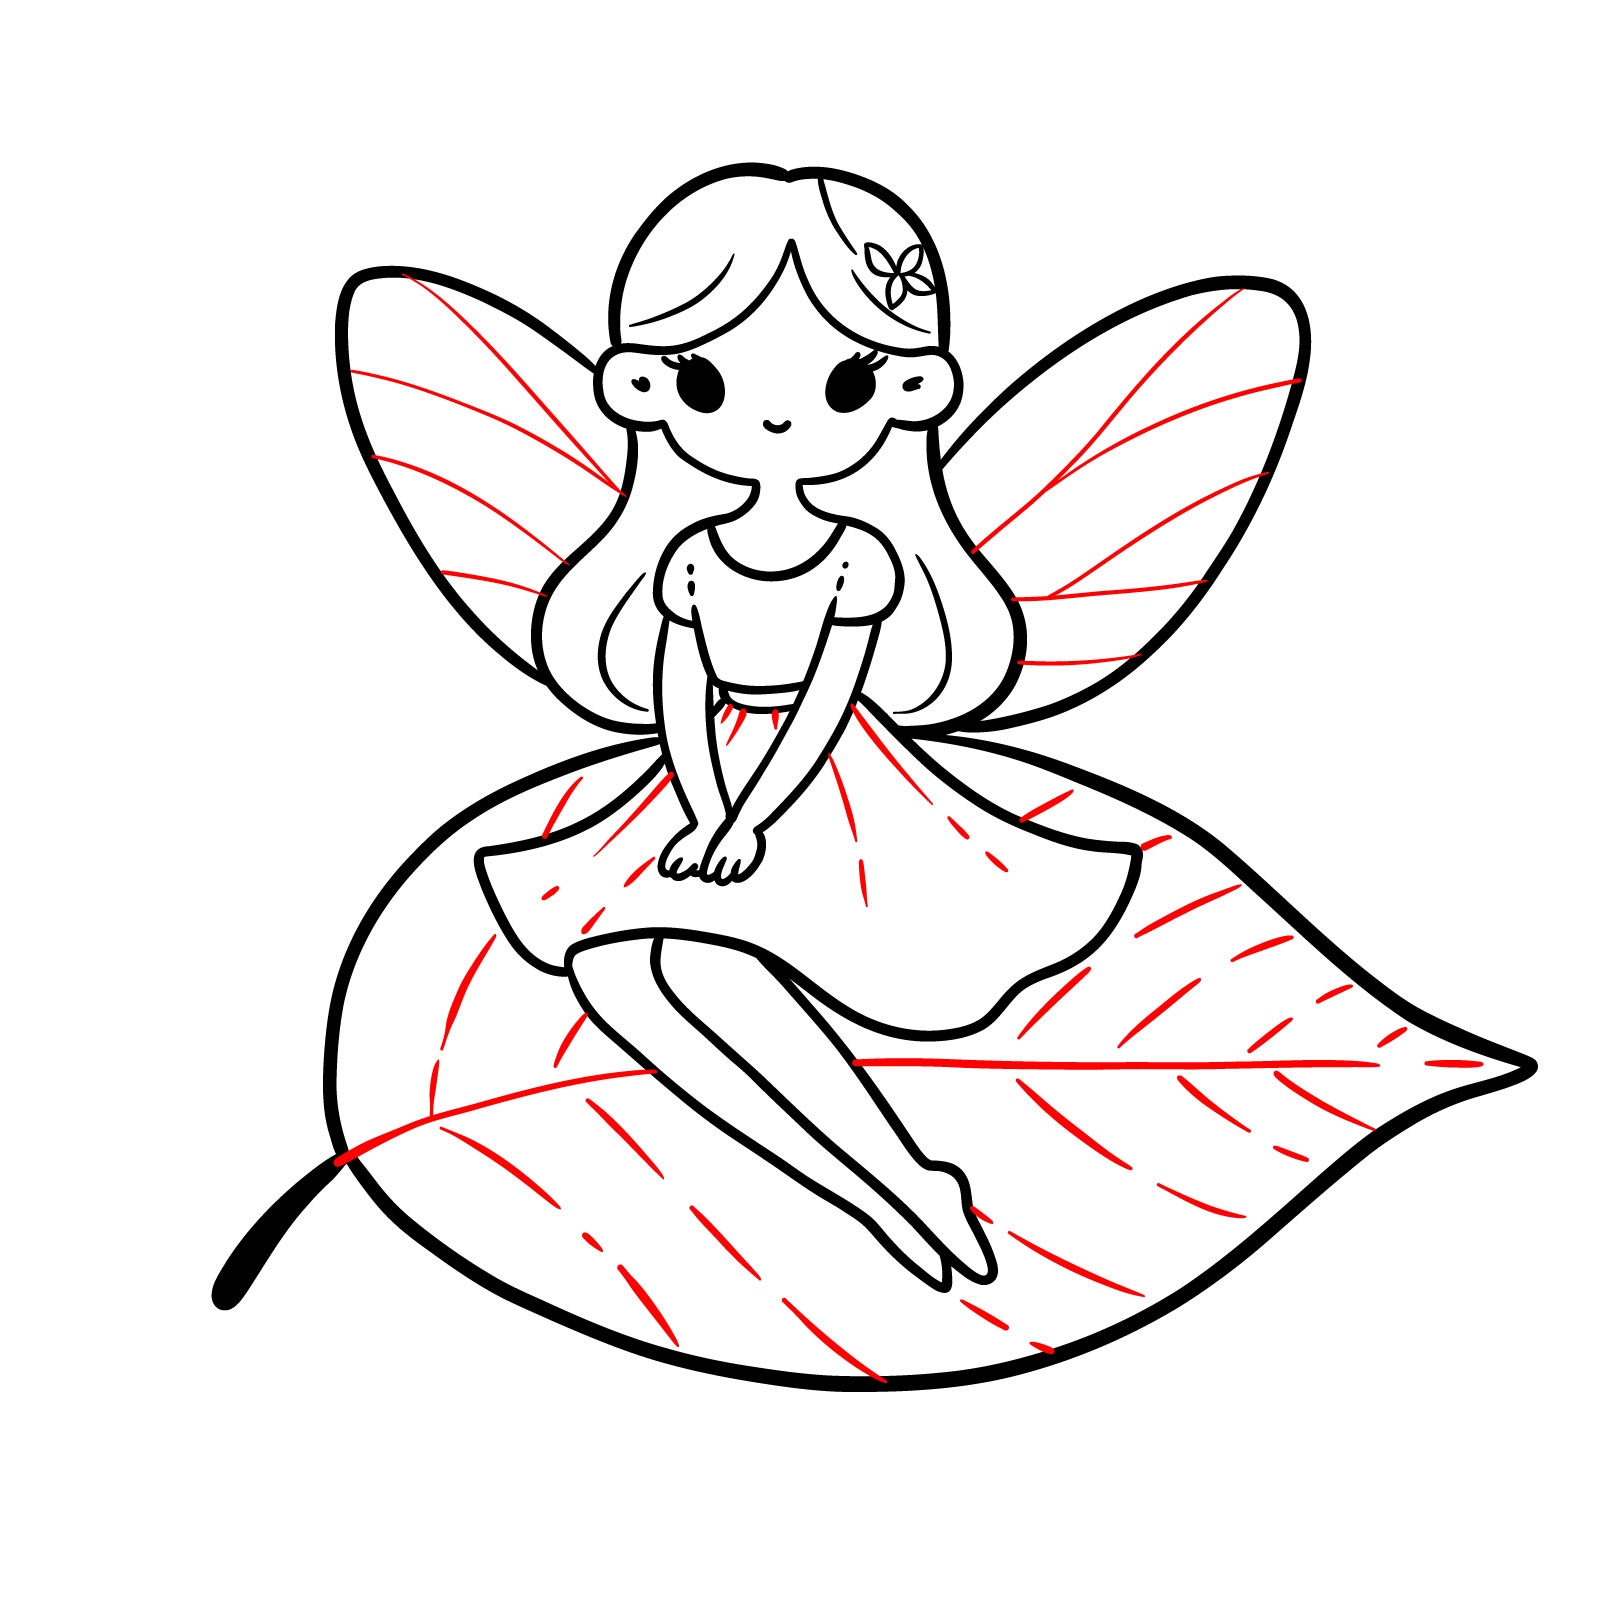 Fairy drawing with detailed leaf and wing patterns - step 14